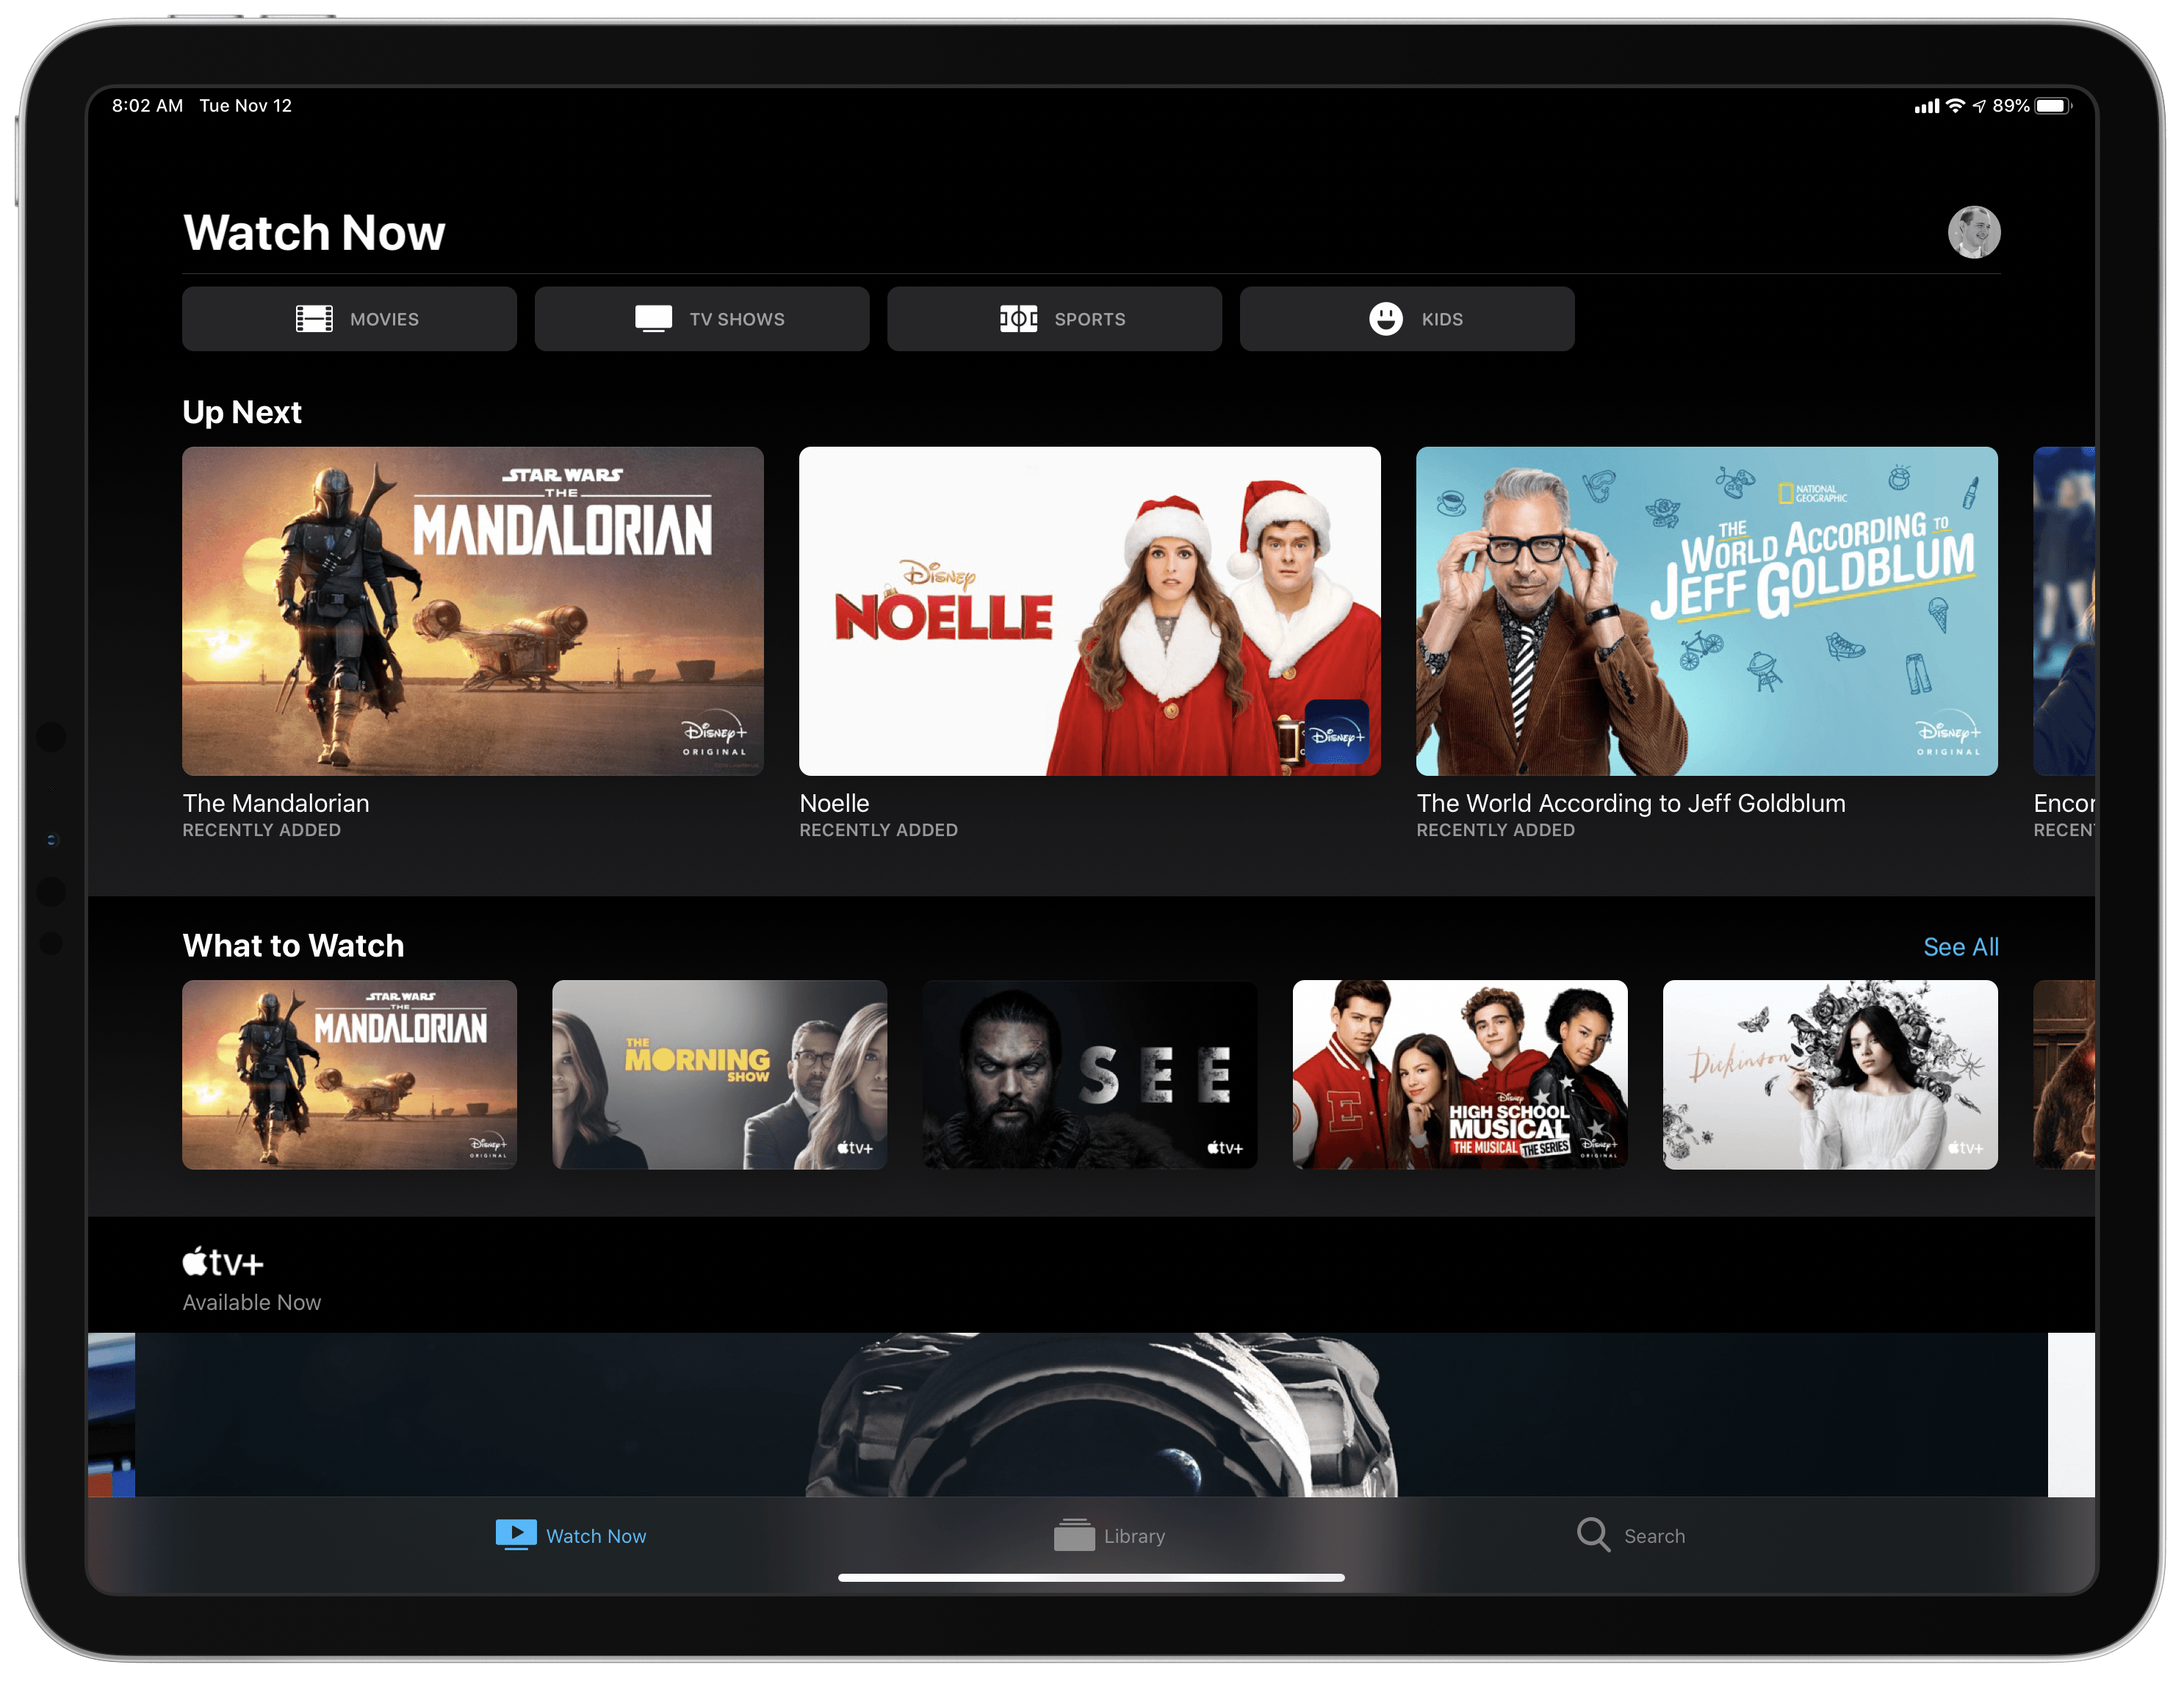 Disney+ Available Now, Integrated with Apple's TV App But Not as a